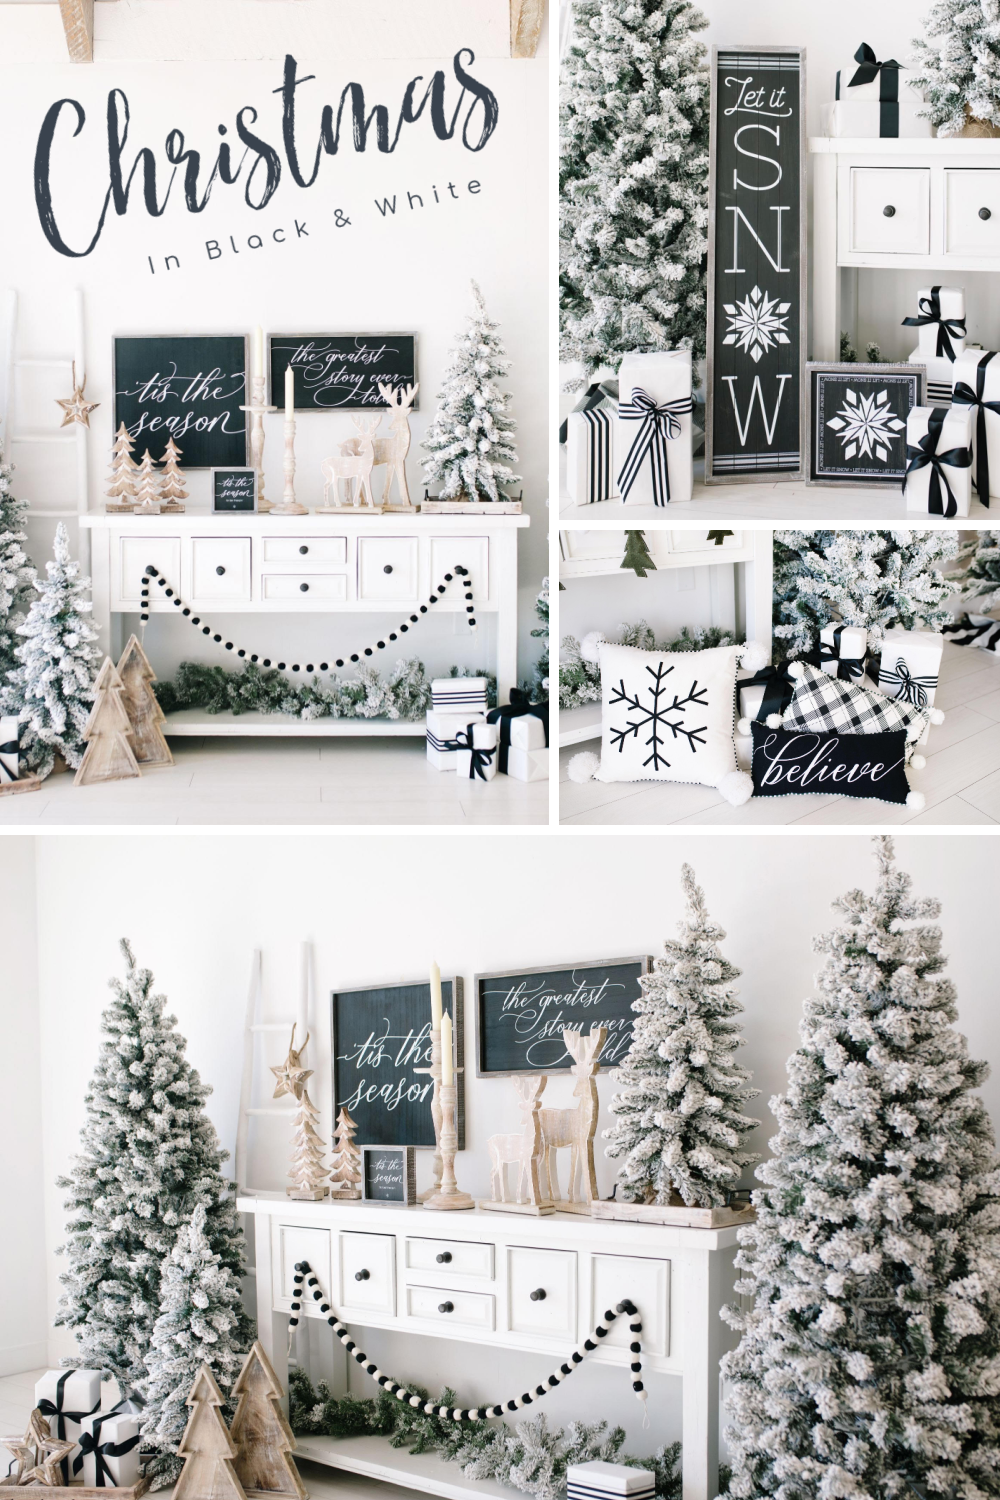 Transitional Black & White Home Decor For Christmas and Winter -   19 farmhouse christmas tree decorations diy ideas